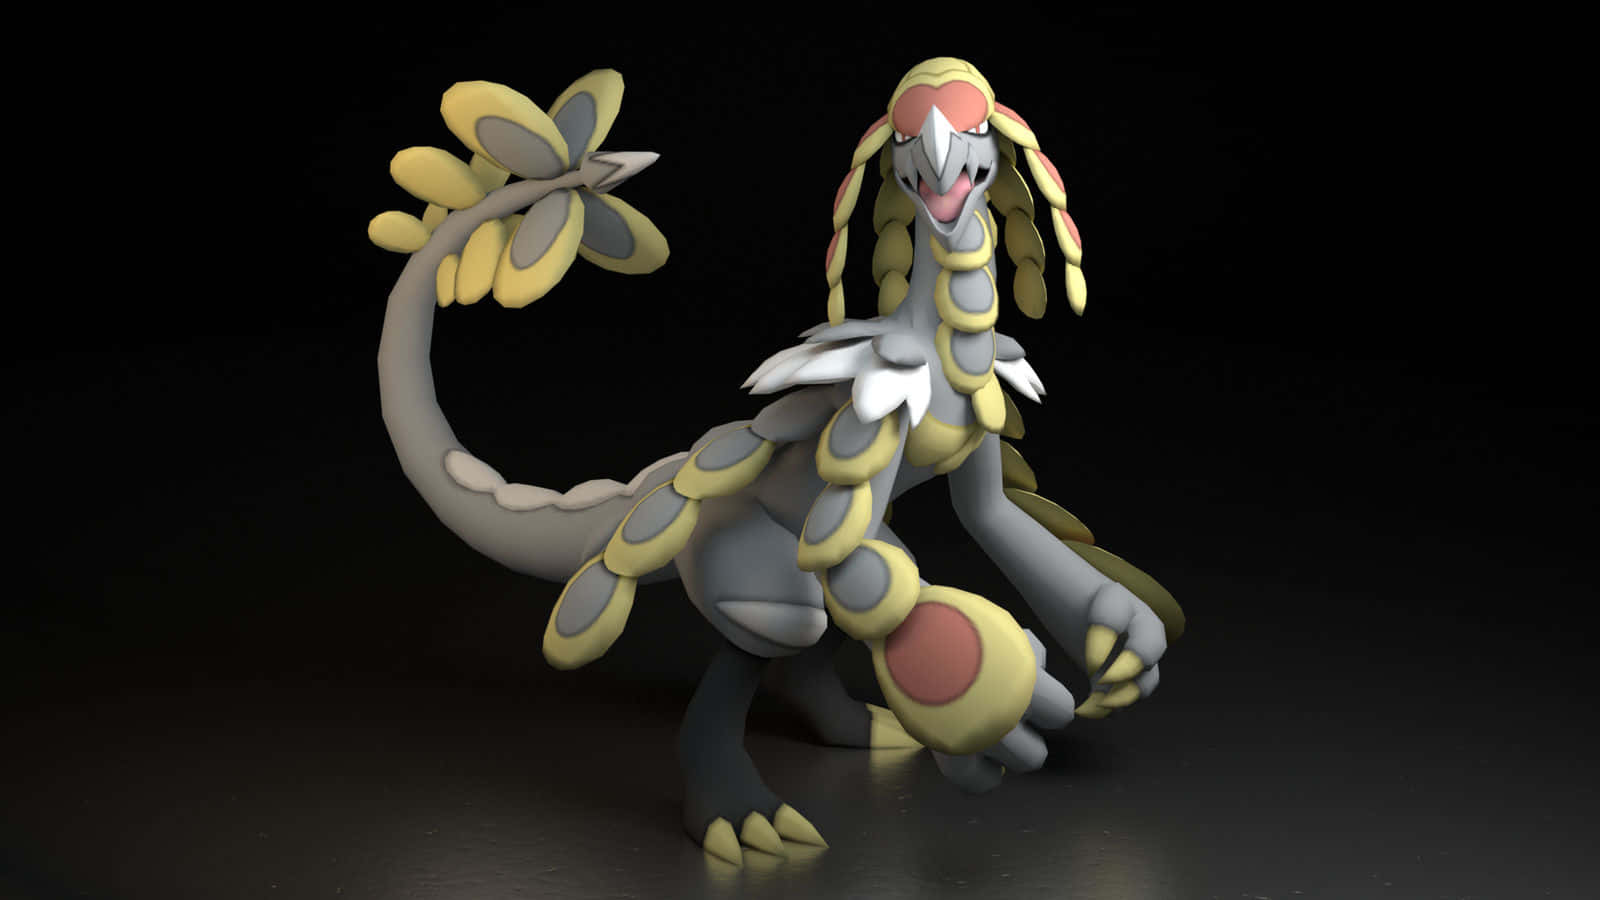 Feralkommo-o 3d Can Be Translated To Spanish As 